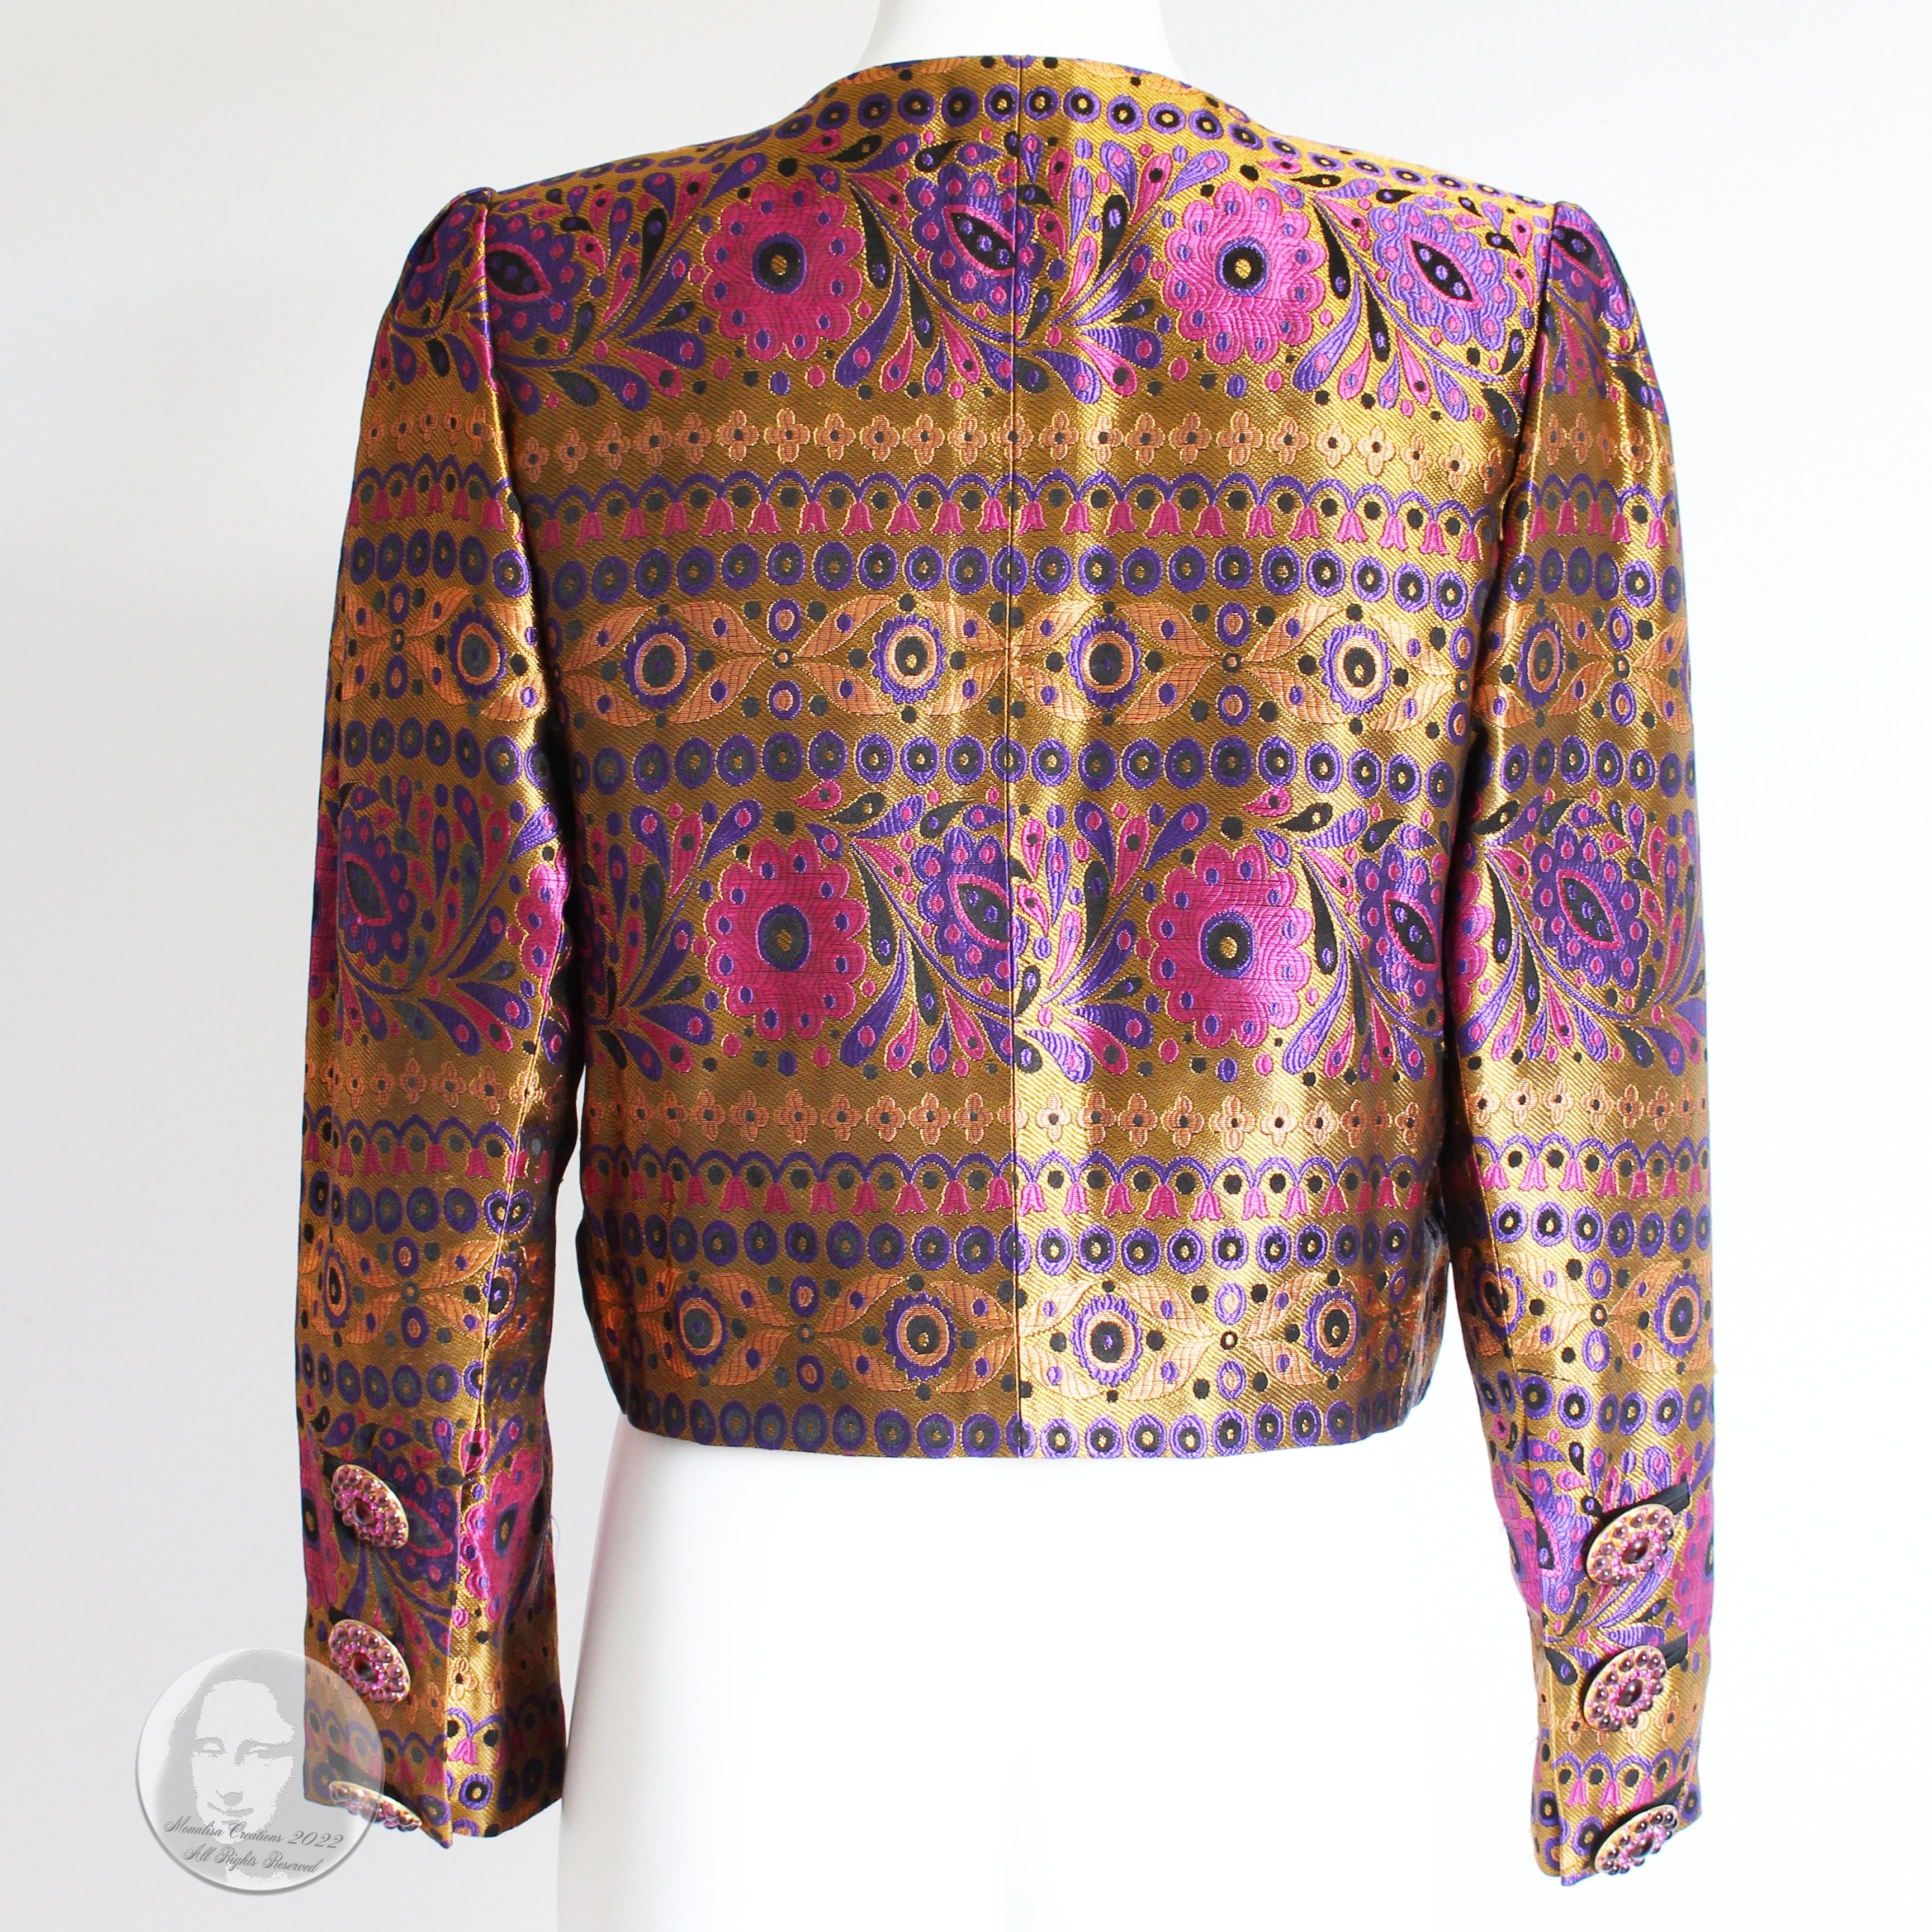 Yves Saint Laurent Jacket Silk Brocade with Embellished Buttons F/W 1991 Runway  6